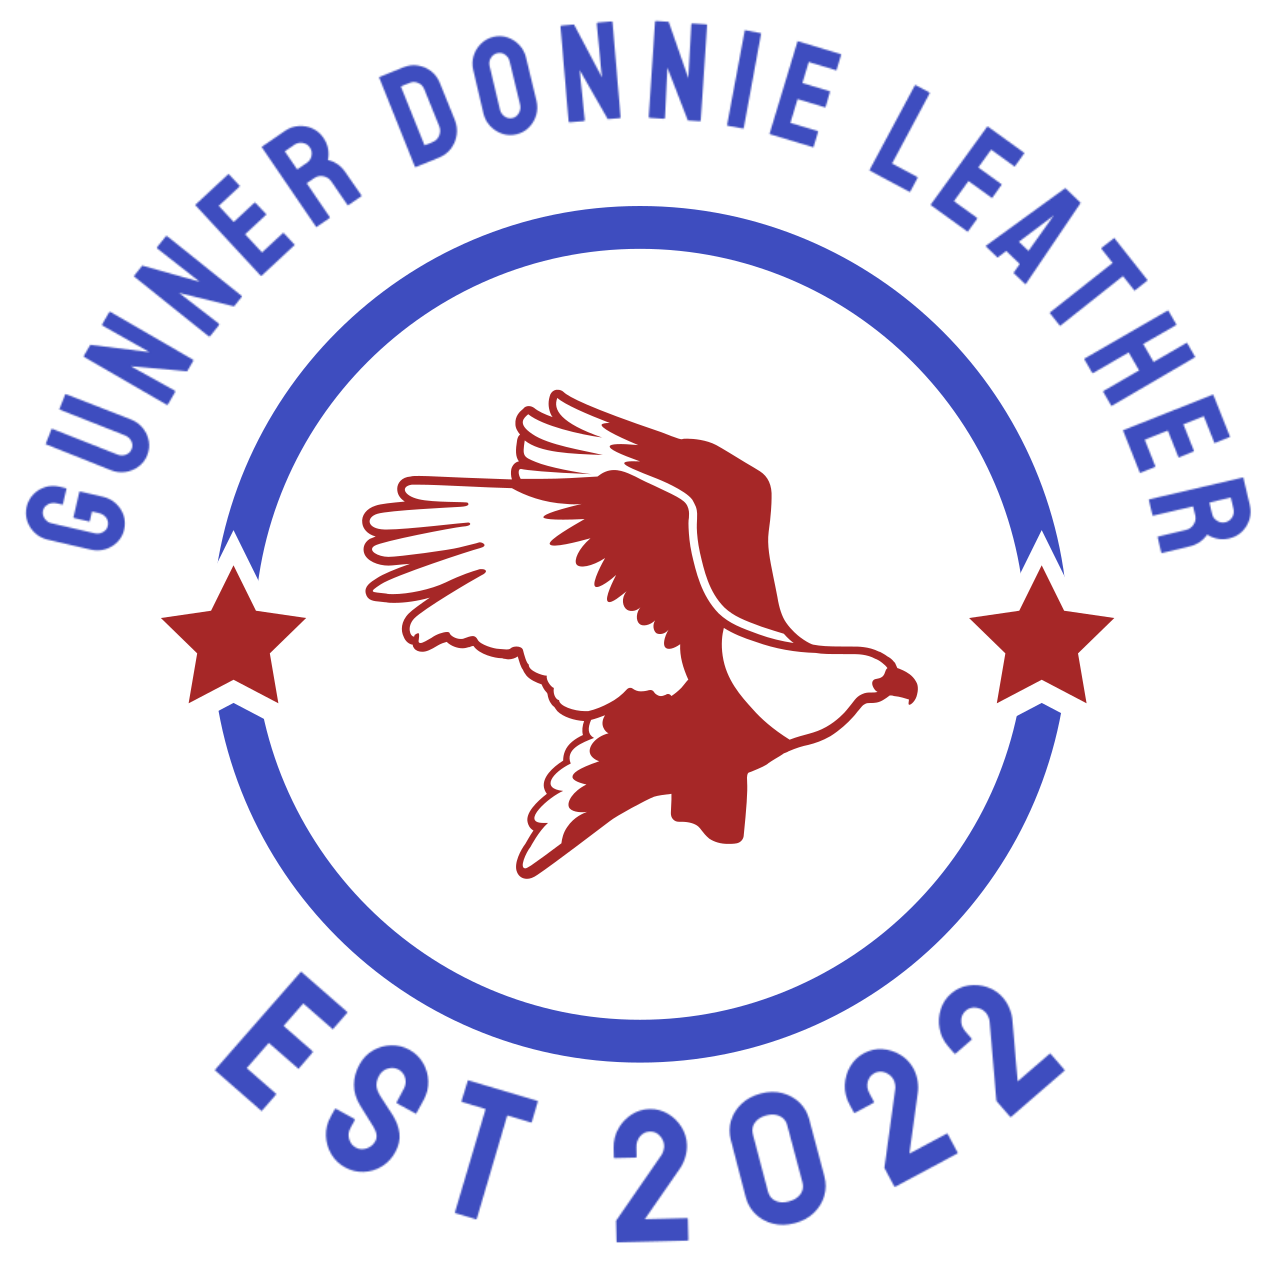 Gunner Donnie Leather's web page